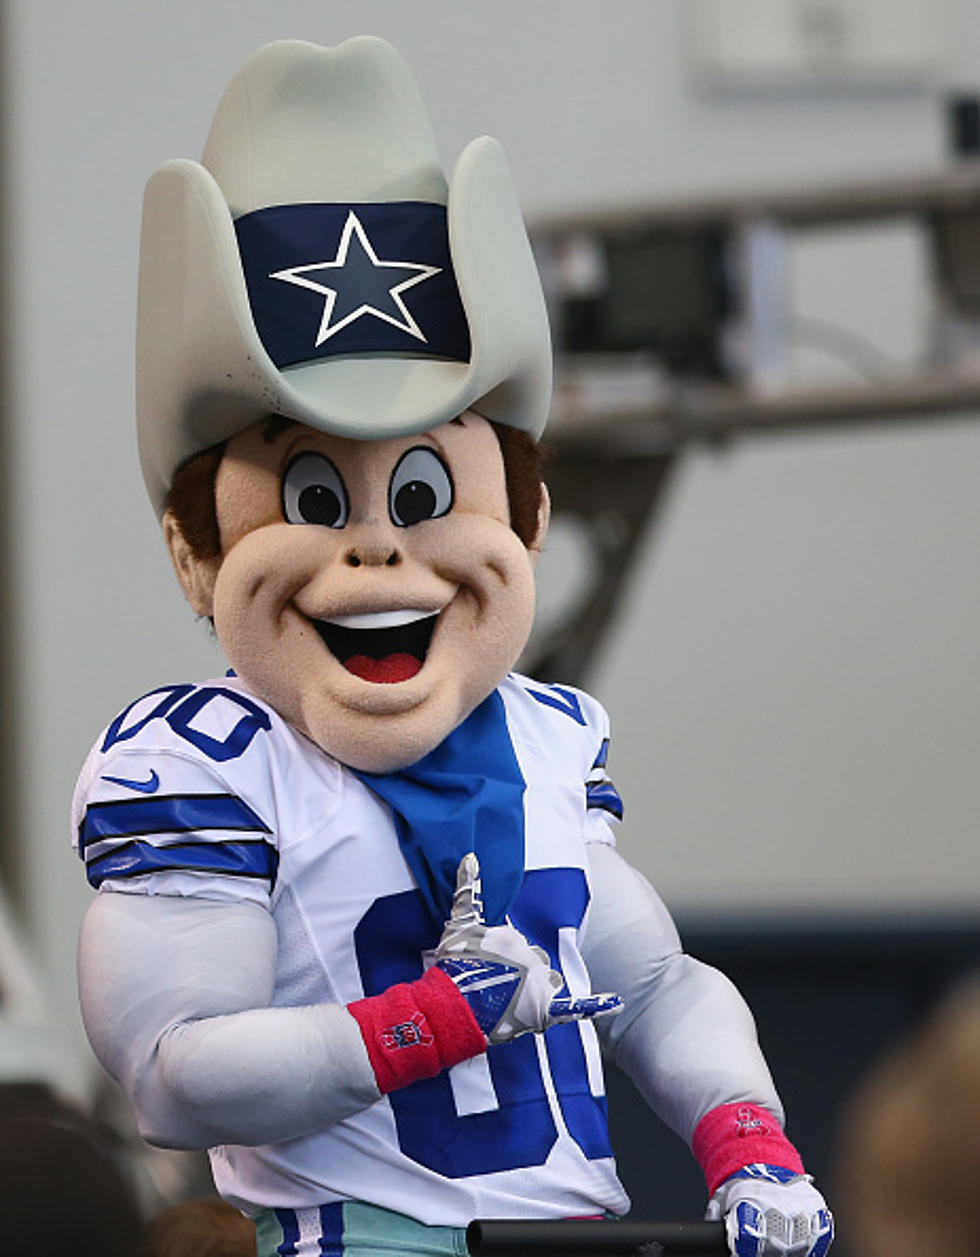 TxDOT and the Dallas Cowboys Team Up For the “Drive Clean Texas” Campaign